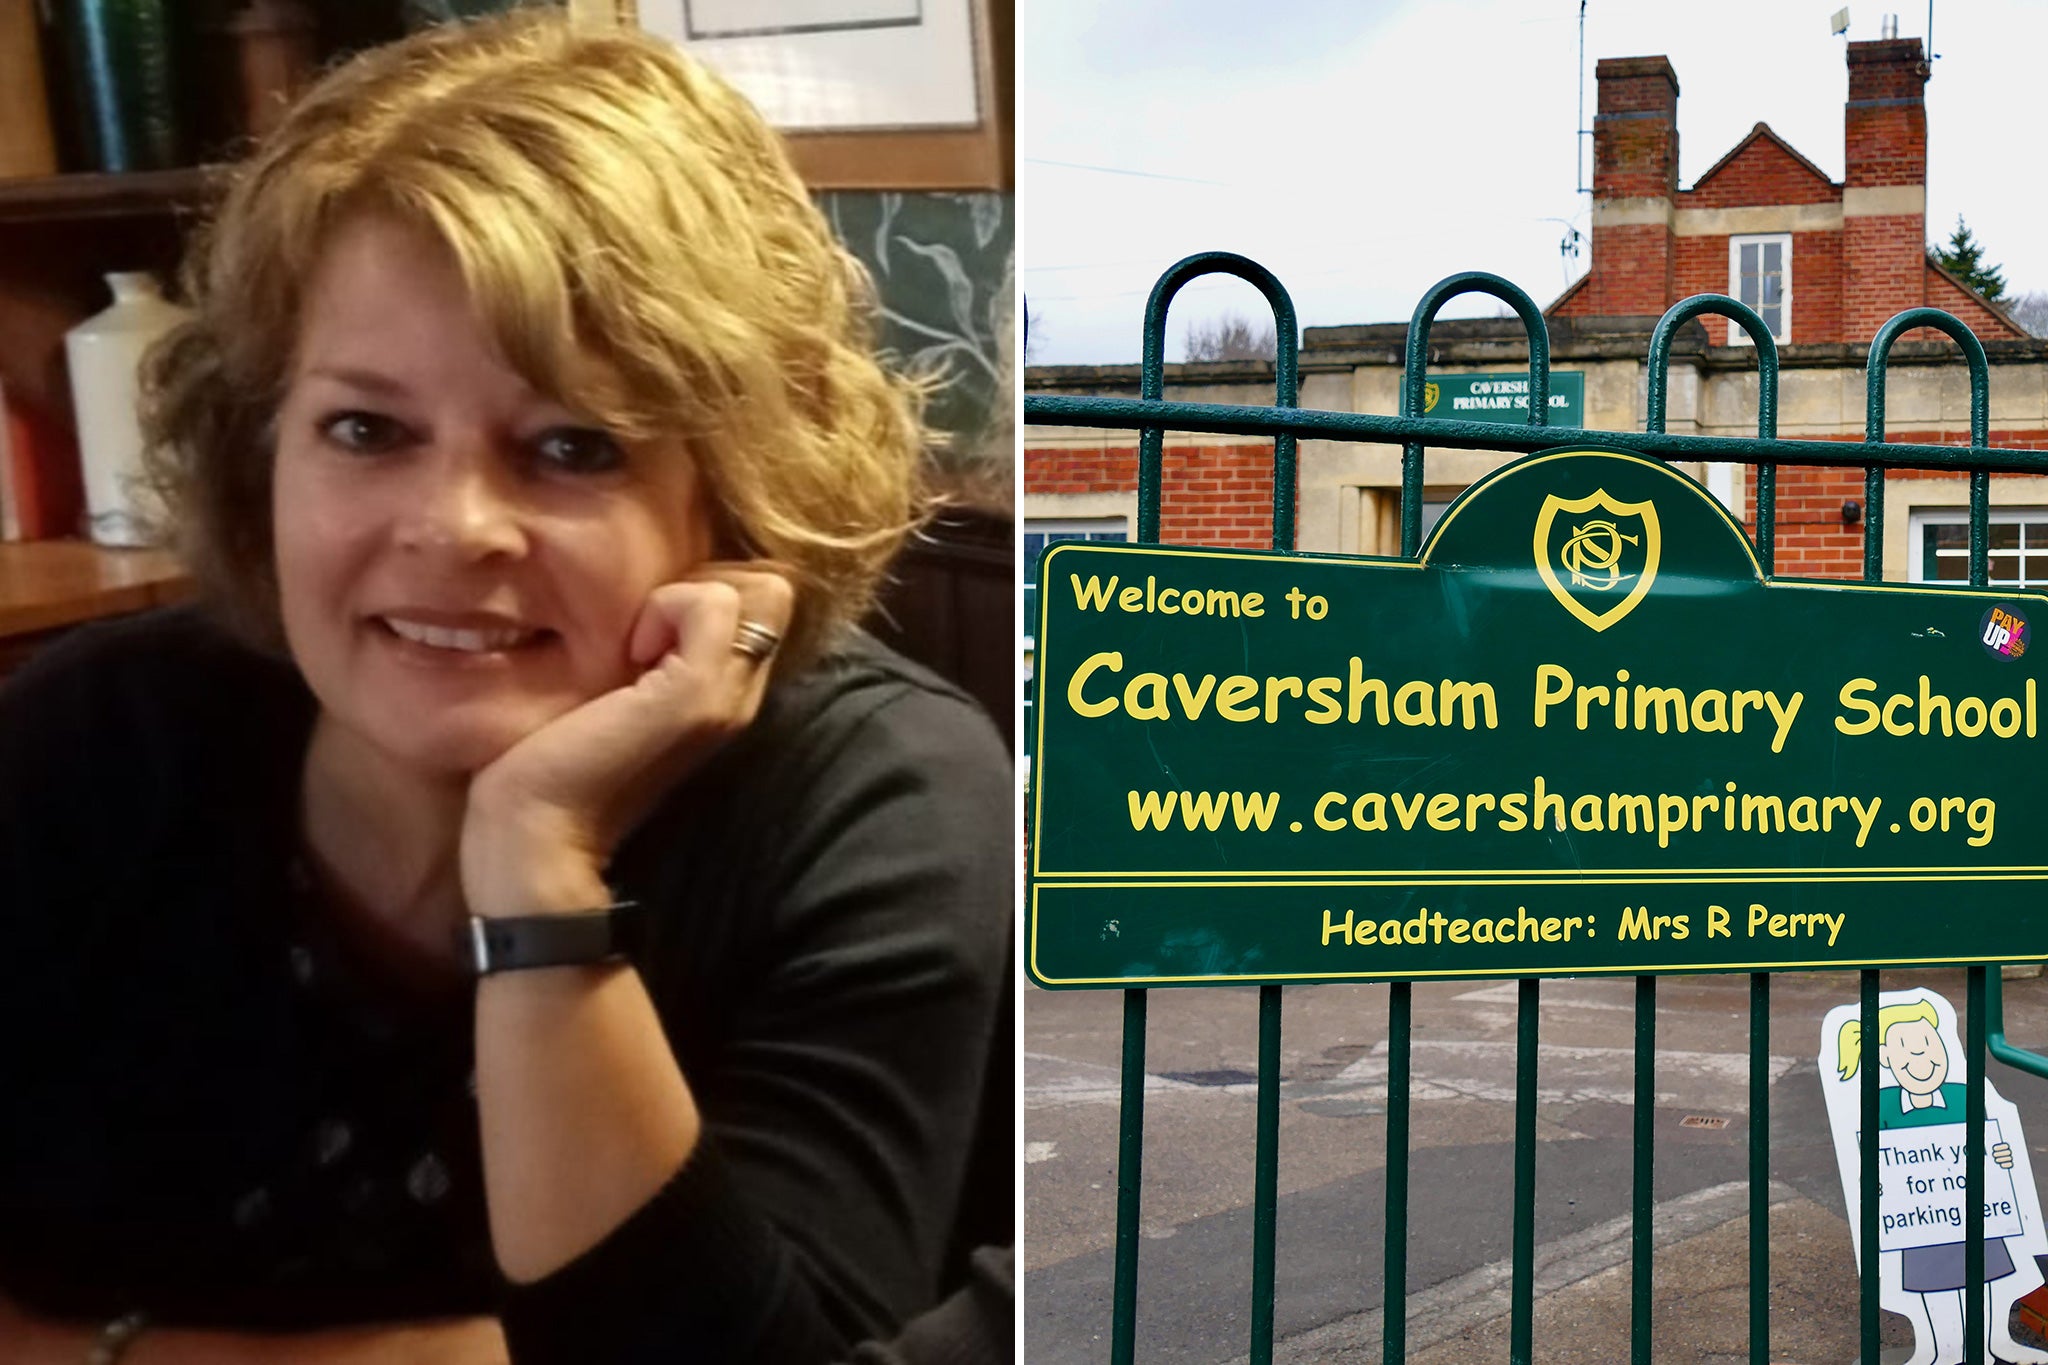 Ruth Perry took her own life after Caversham Primary School was graded ‘inadequate’ by Ofsted